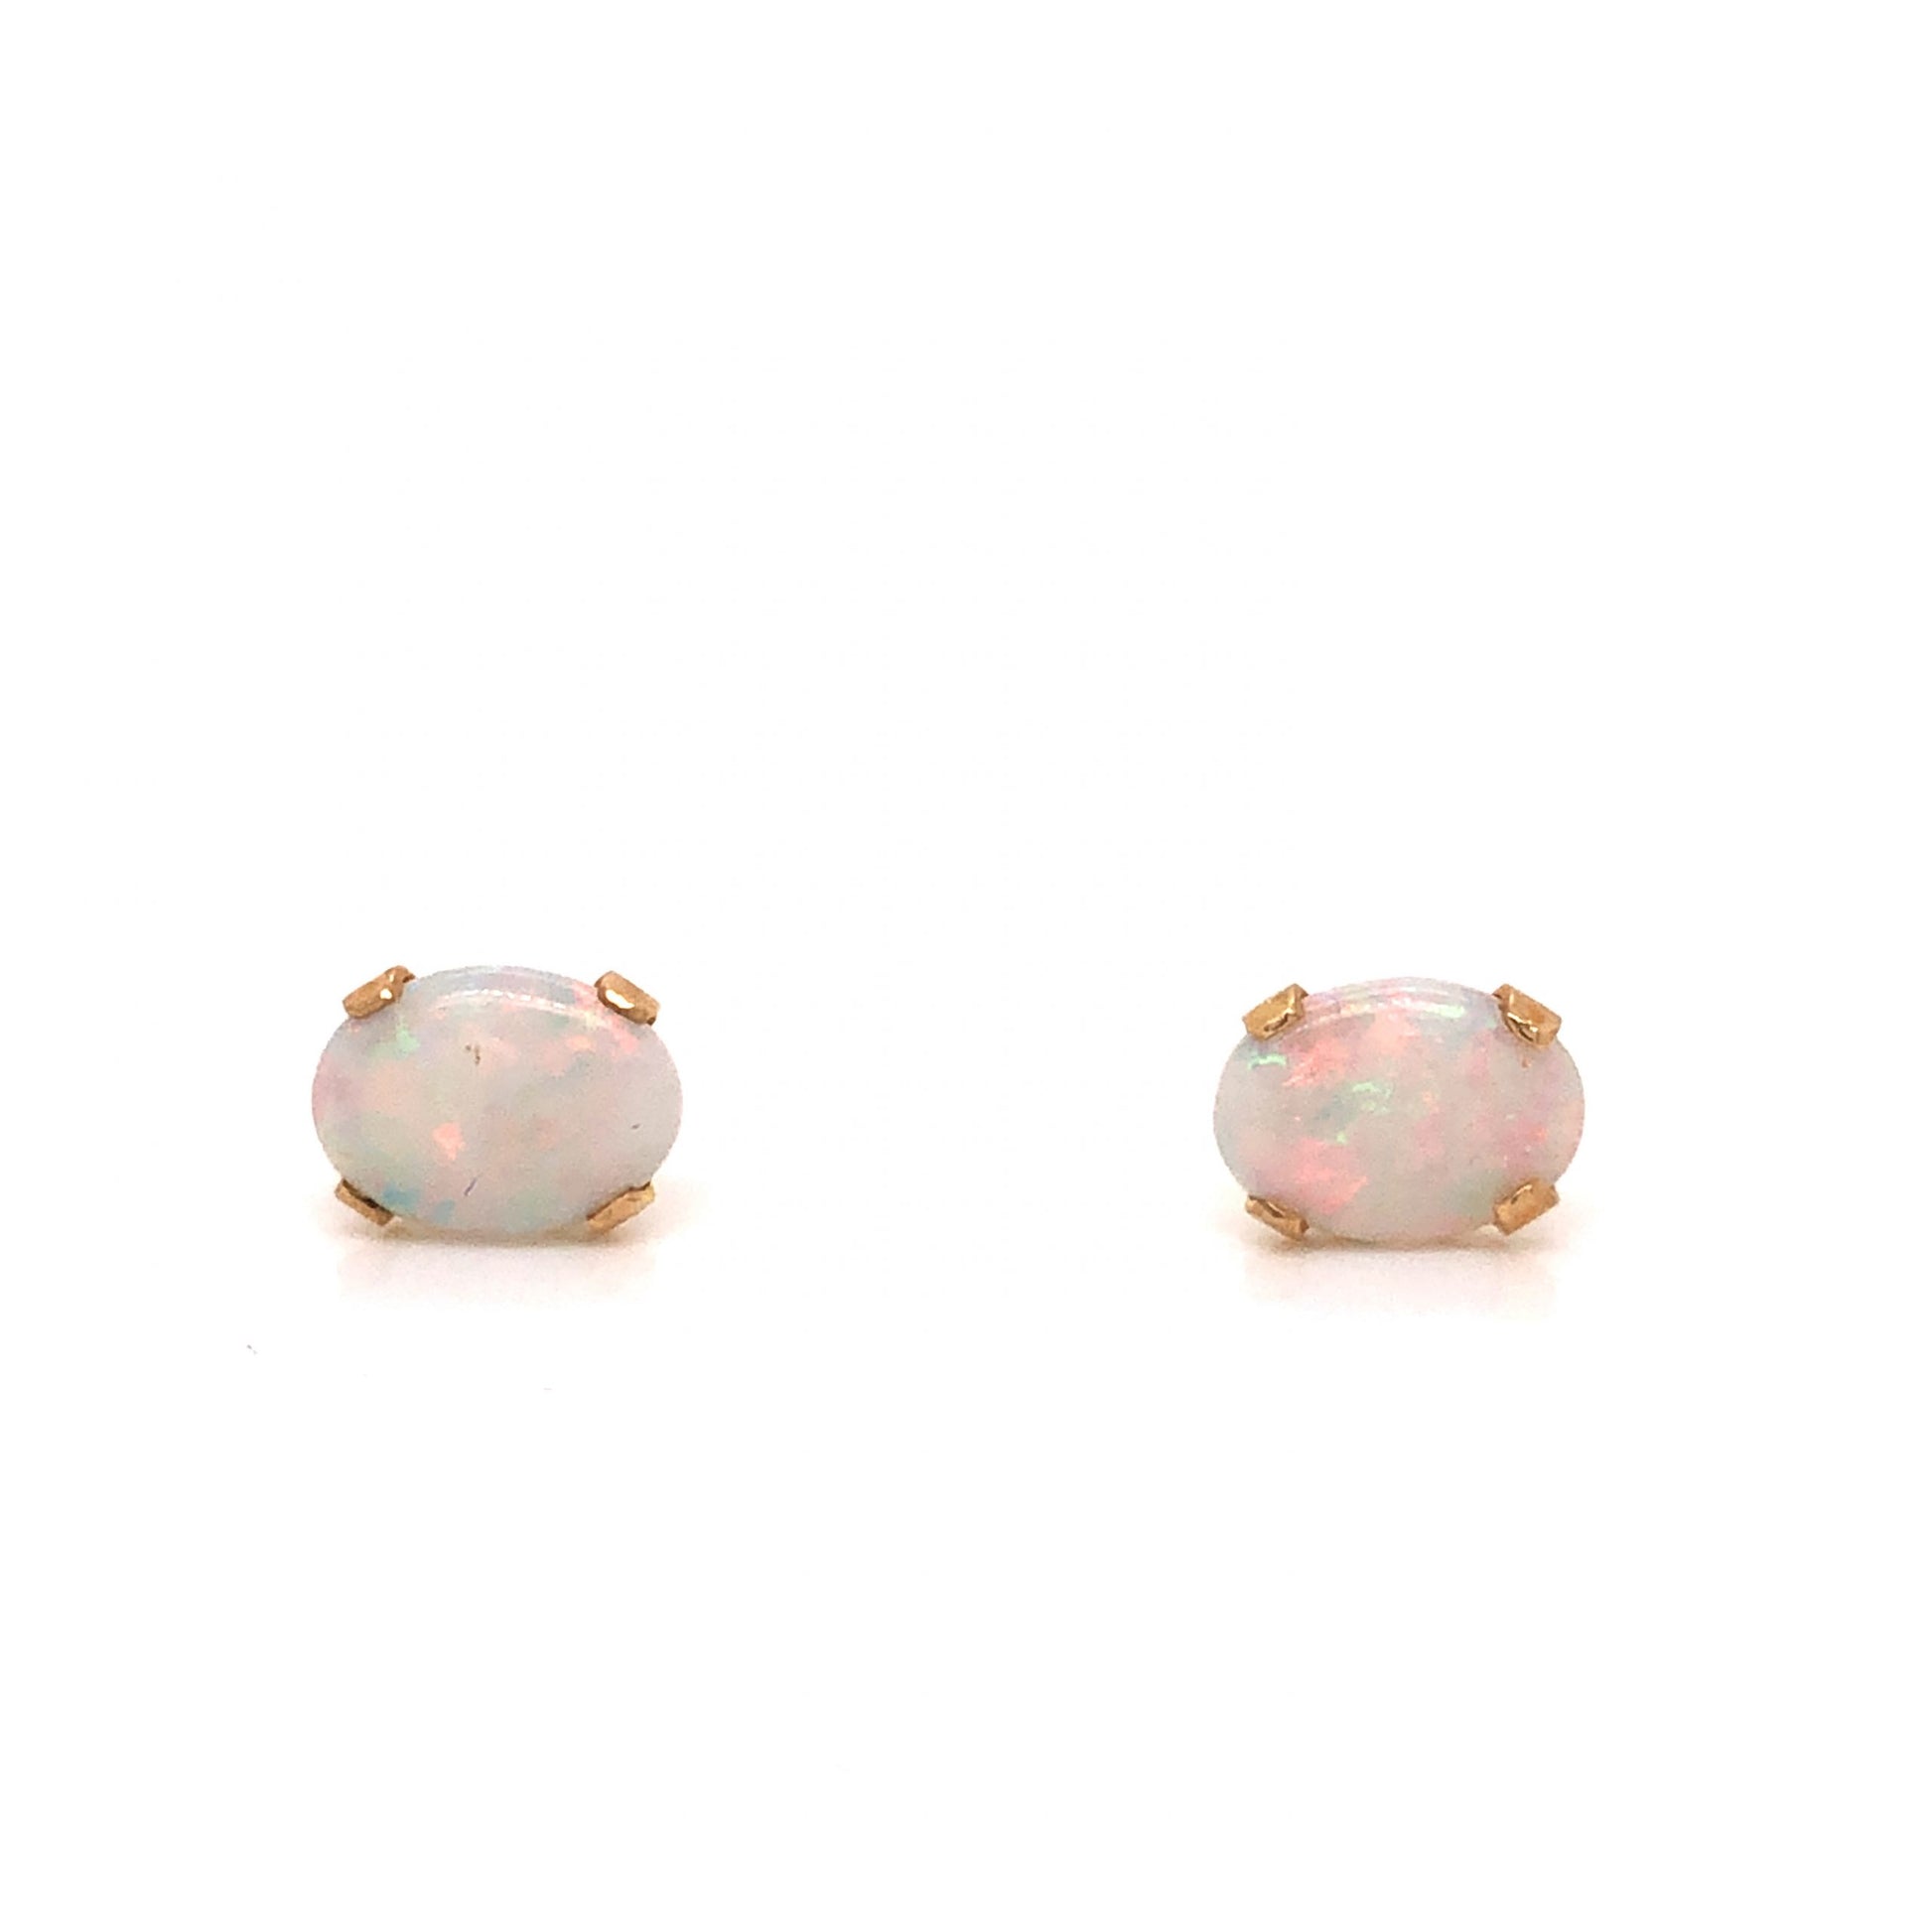 Oval Opal Stud Earrings in 14k Yellow GoldComposition: 14 Karat Yellow GoldTotal Gram Weight: .70 g